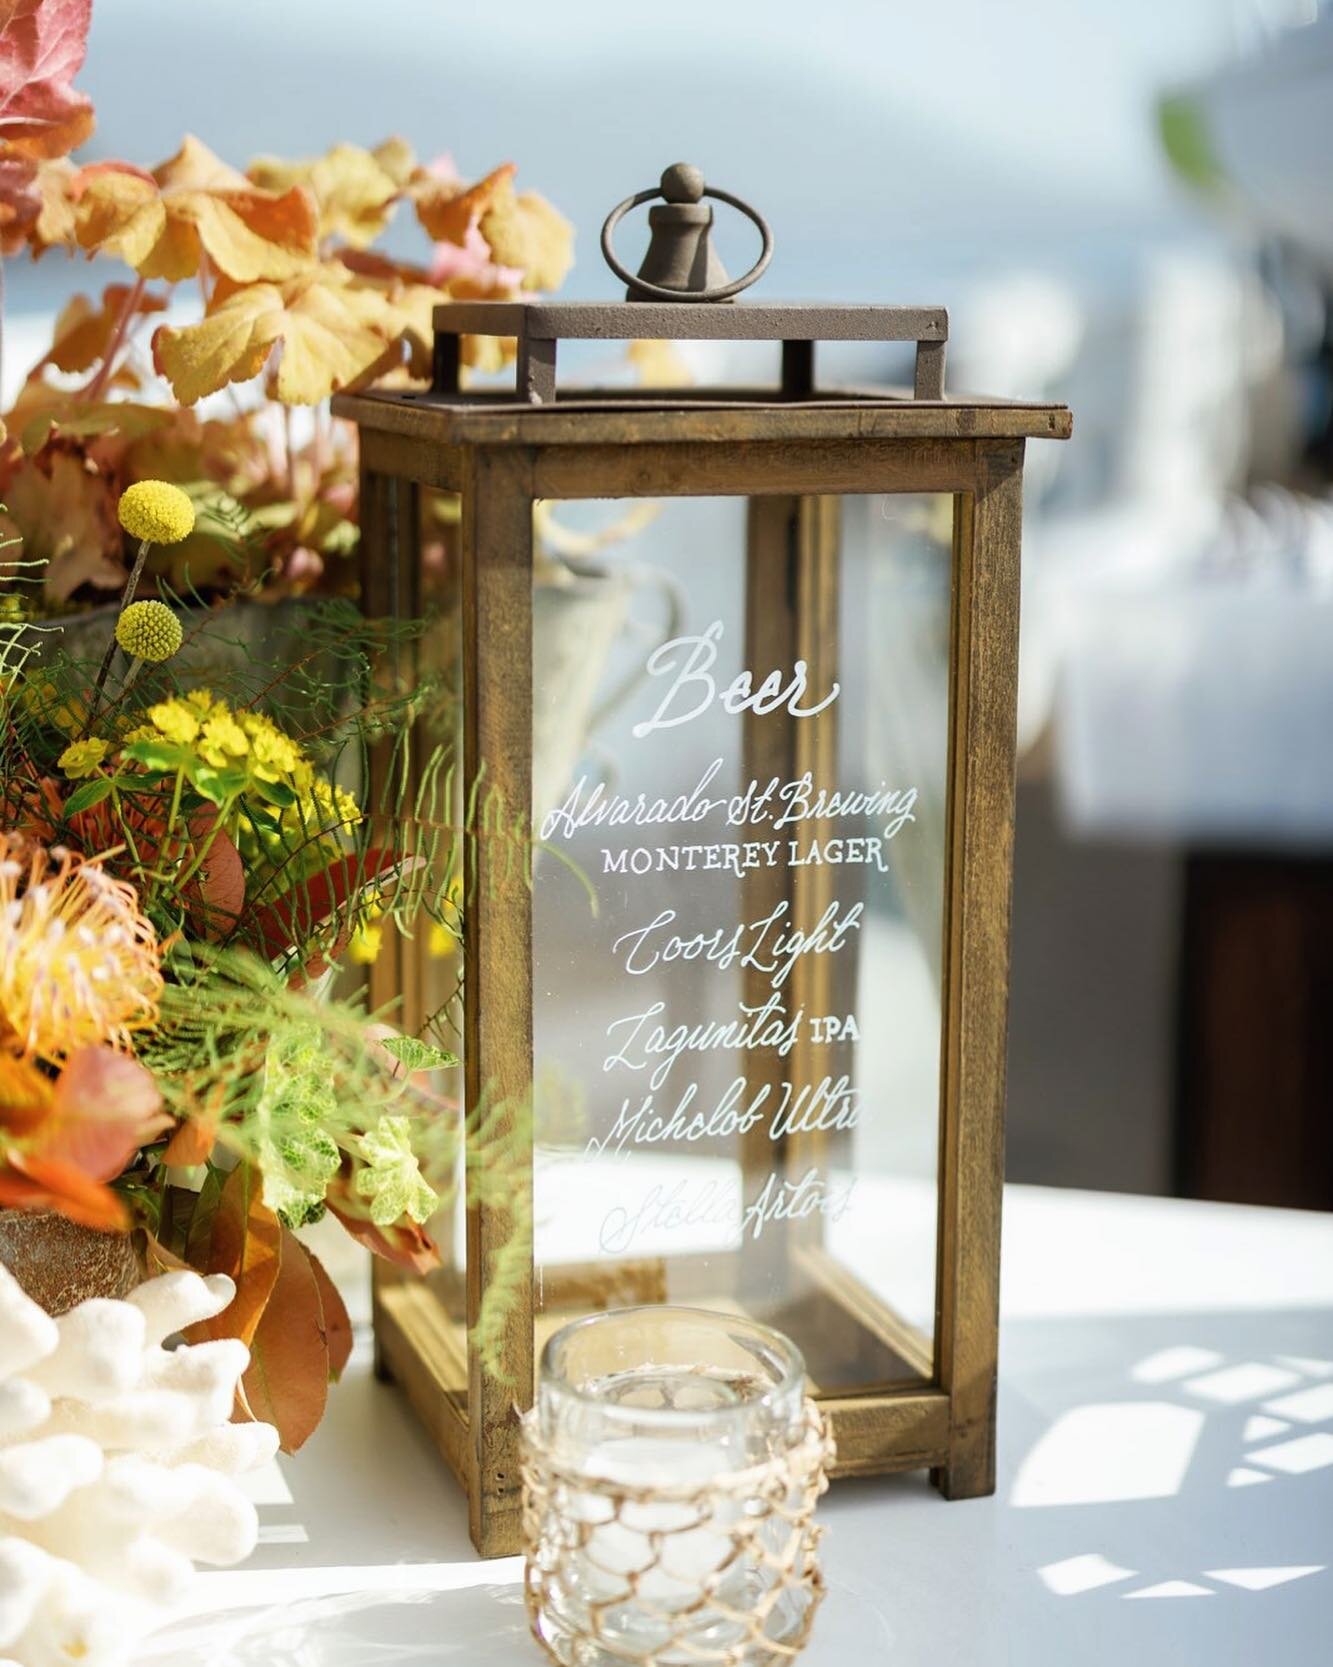 Never has a beer list looked so lovely. Who&rsquo;s ready for the long weekend?
&mdash;
Scenes from L&amp;E&rsquo;s wedding with:
Event planner: @kindredeventsco
Photographer: @chardphoto
Floral, Design: @mindyricedesign